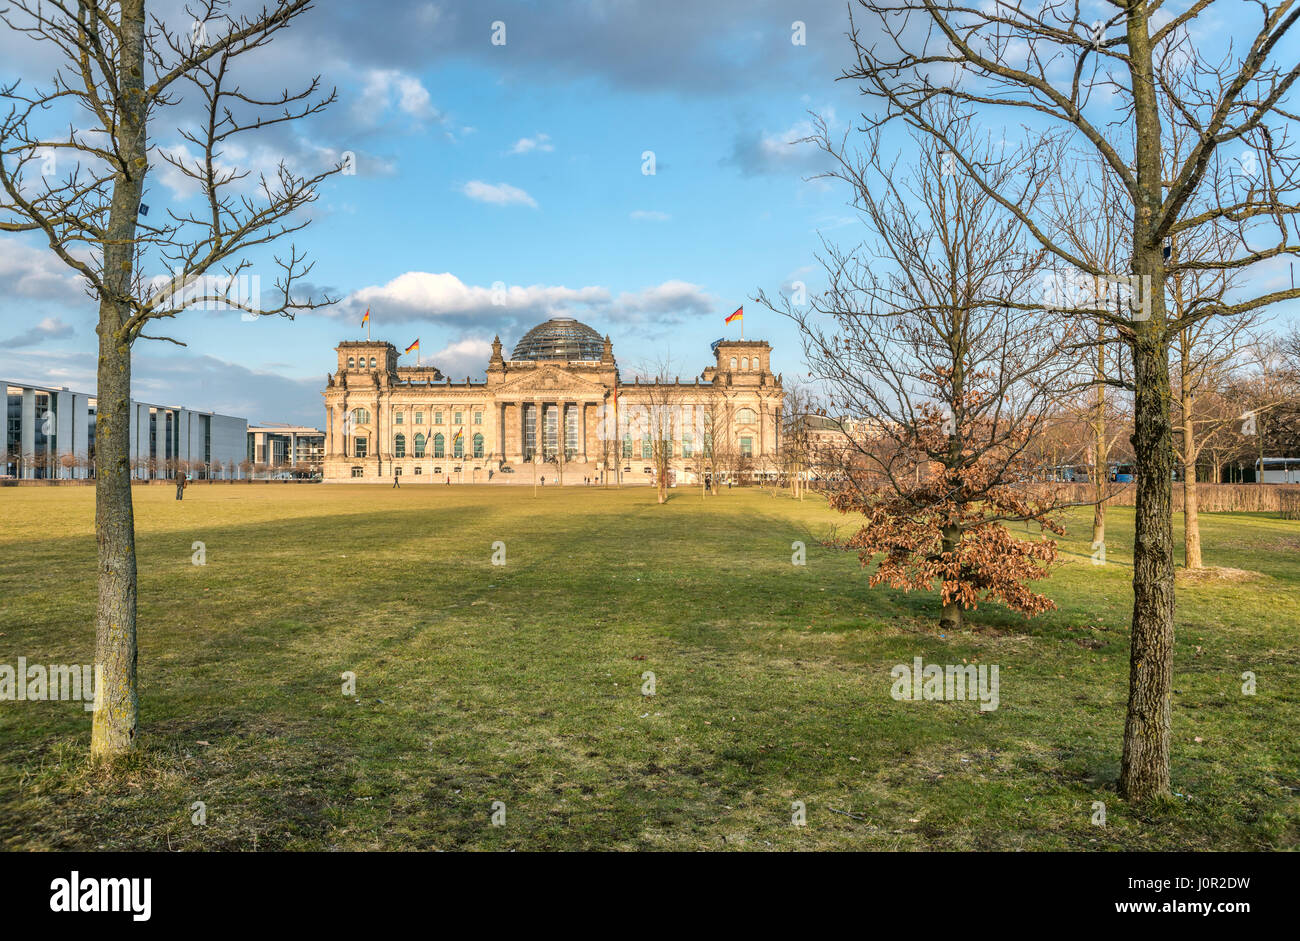 German parliament Reichstag building at the government quarter of Berlin, Germany Stock Photo